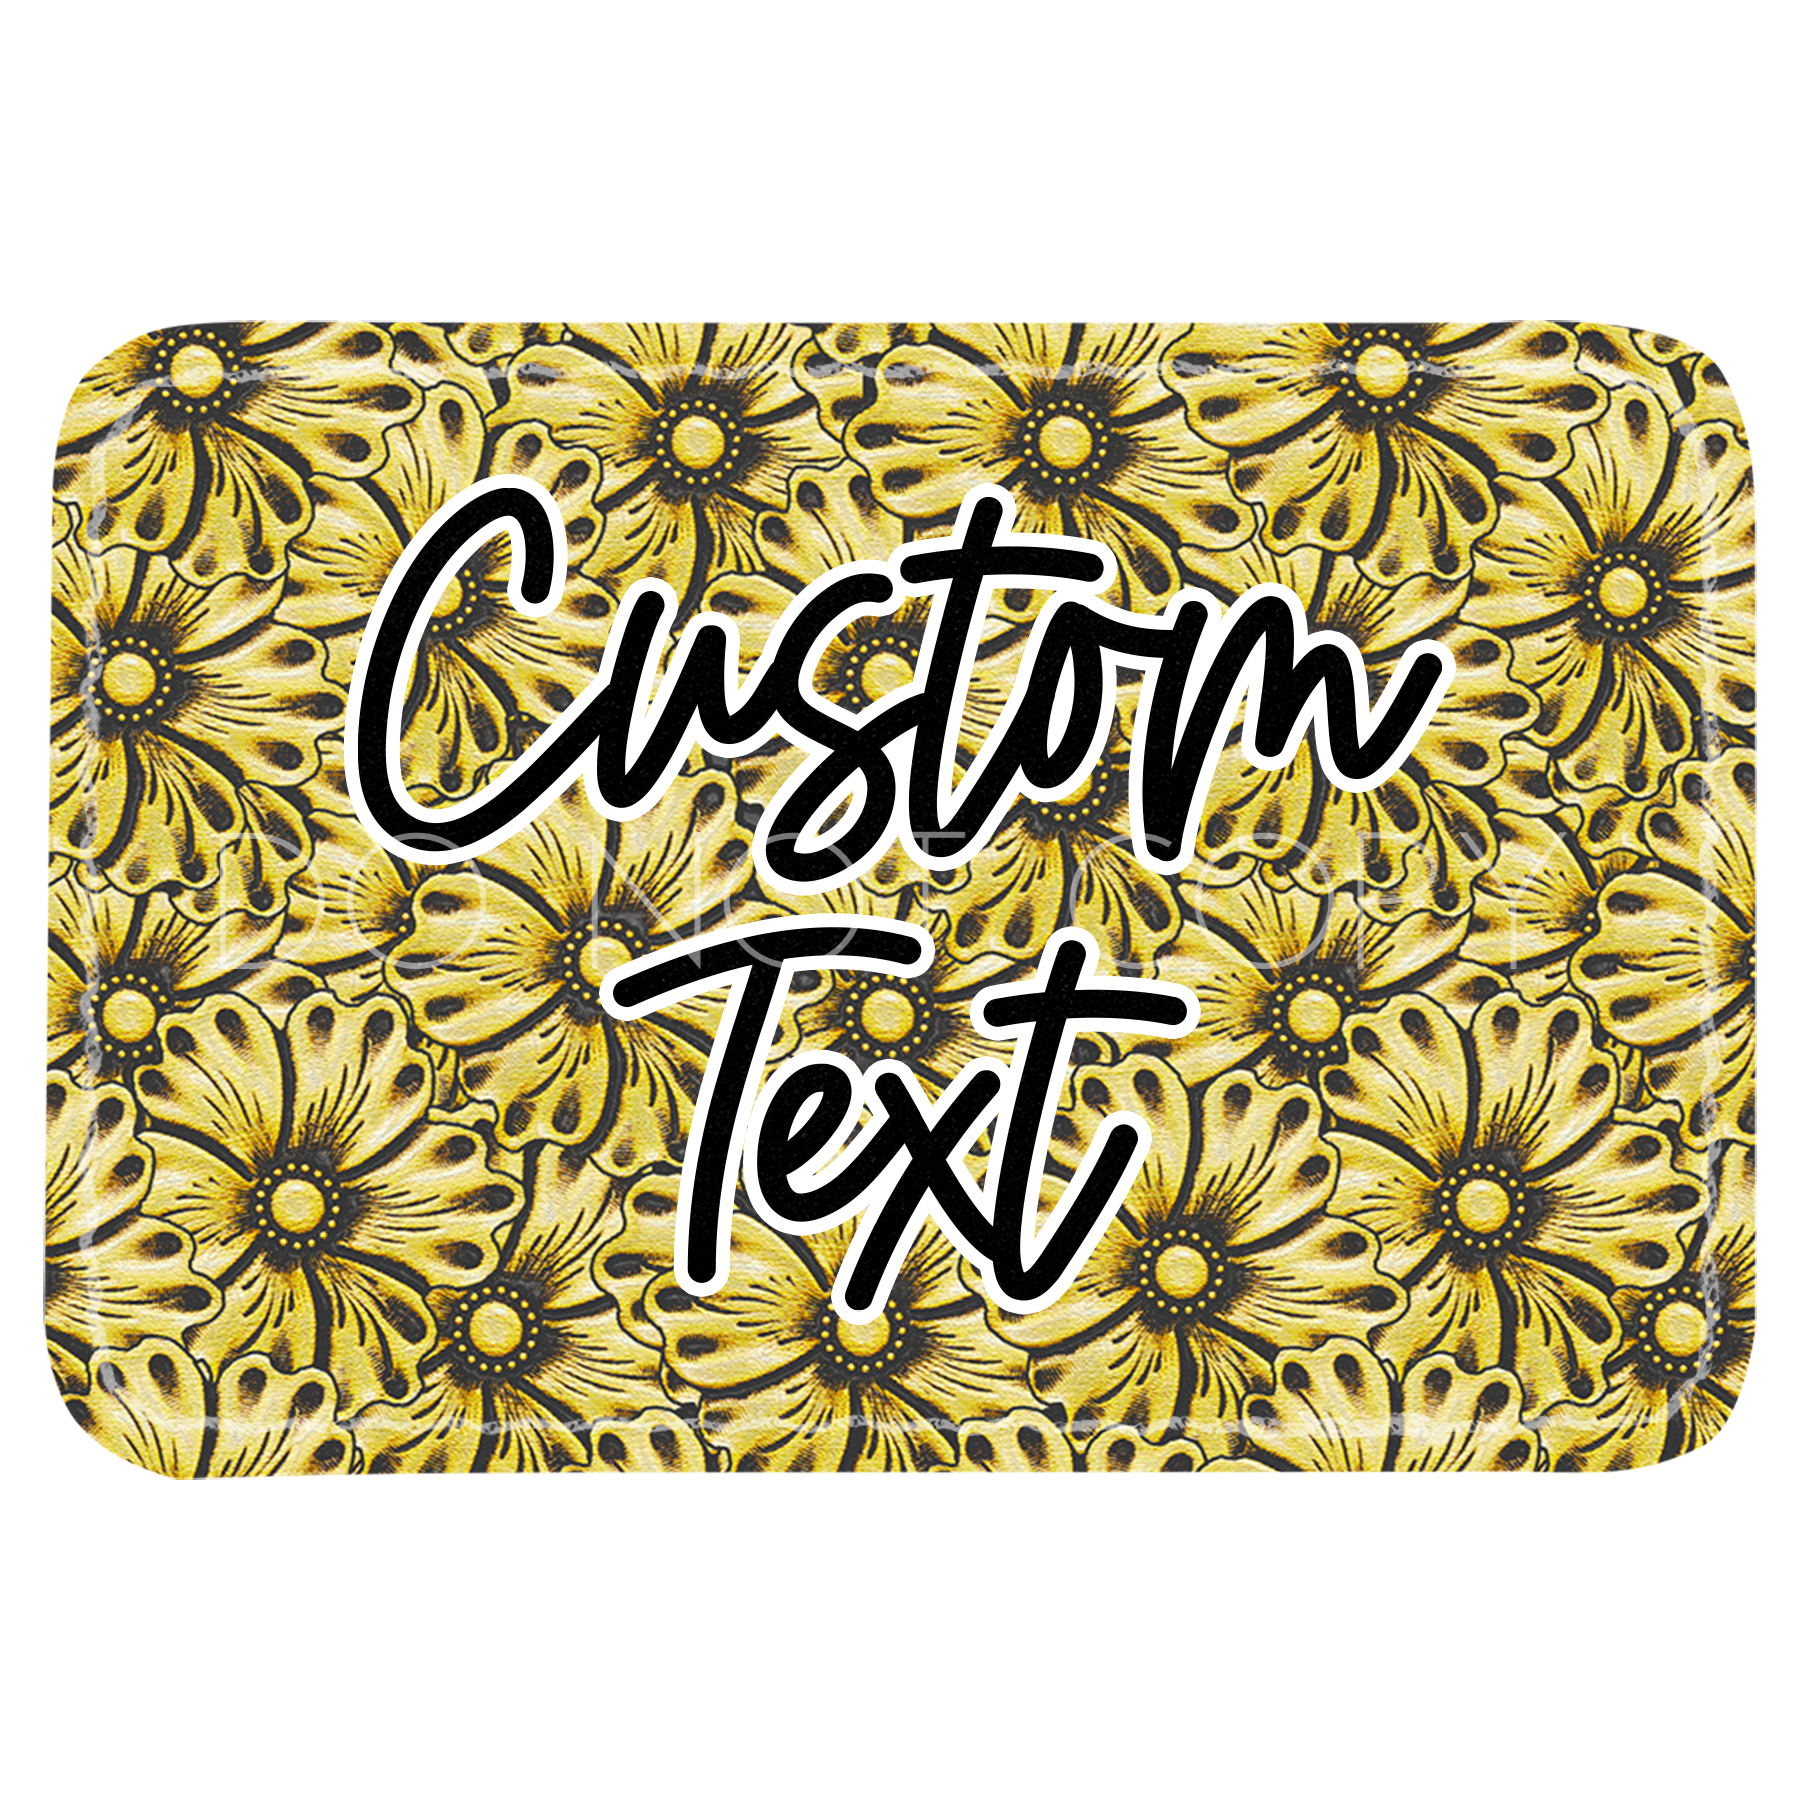 Yellow Floral Tooled Leather Patch